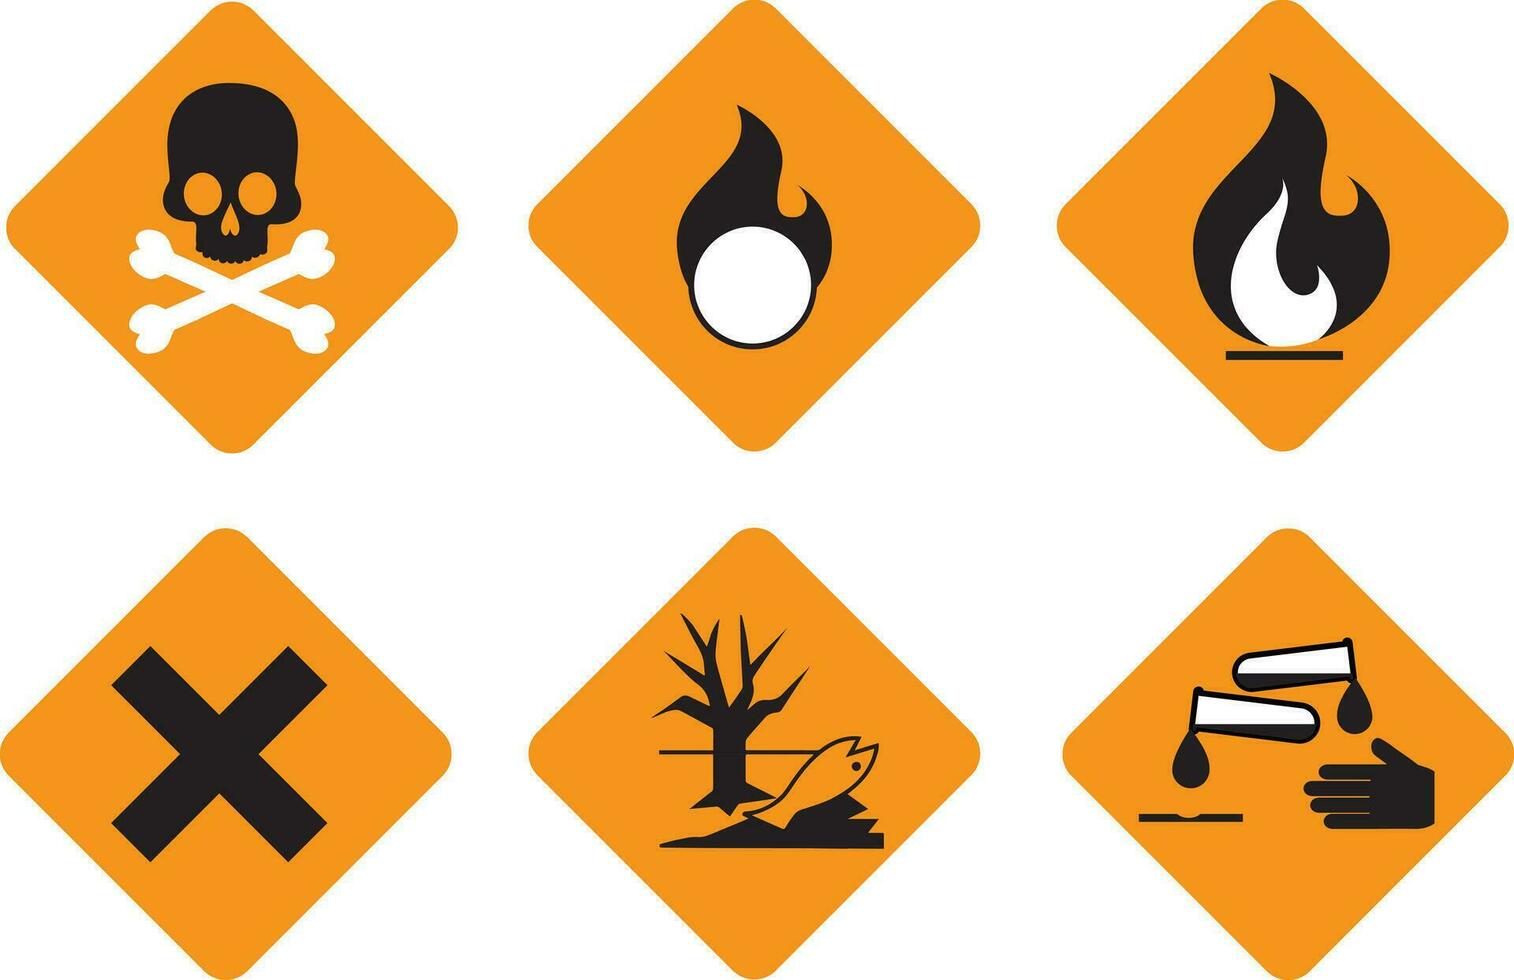 Set of flammabl chemicals - hazard symbols and warning sign isolated on white, vector